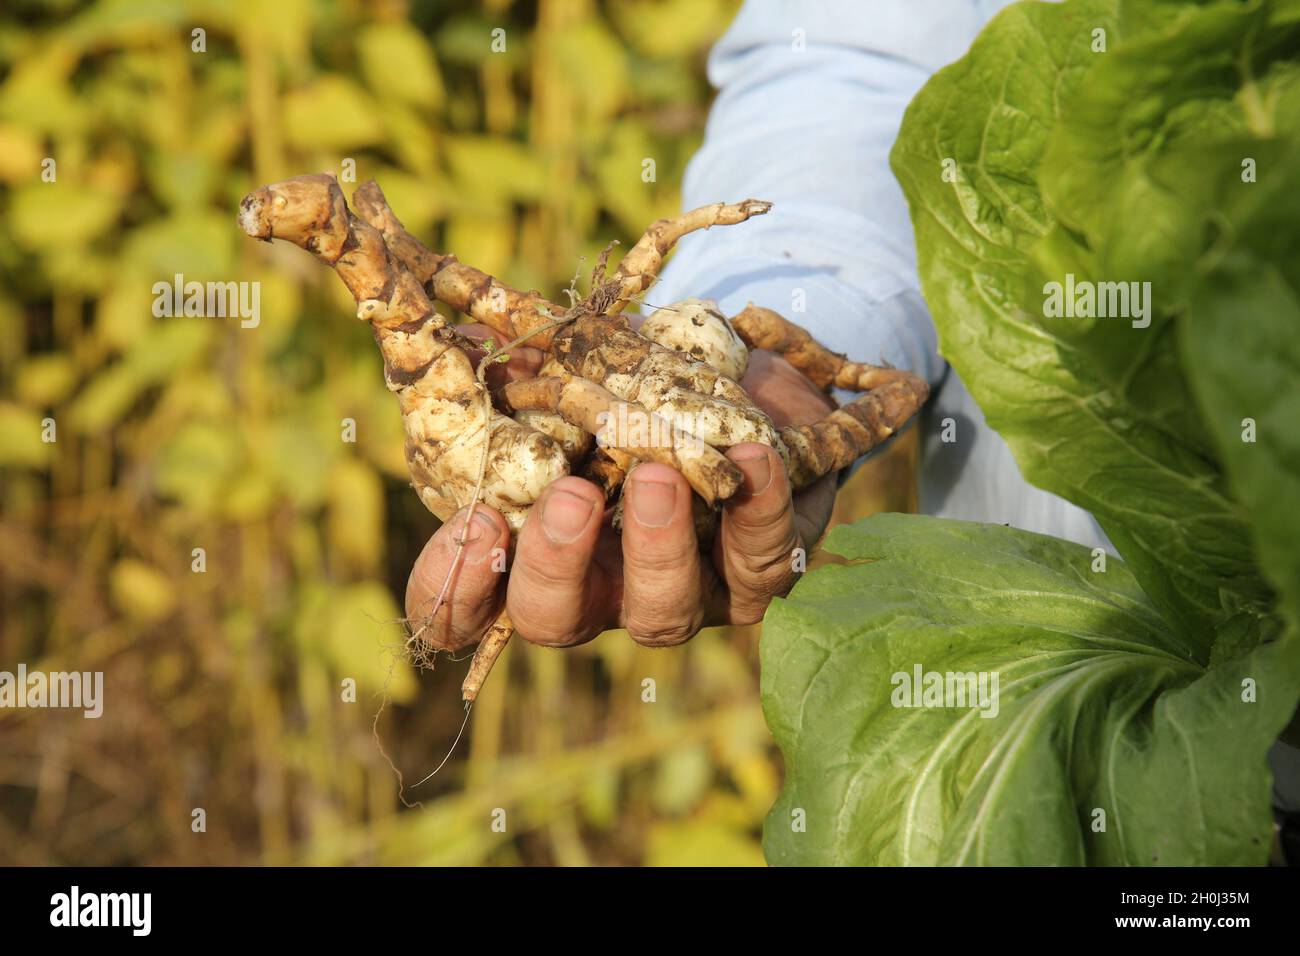 Man holds vegetables, topinambour, sunchoke roots in hand. Fresh harvest. Stock Photo